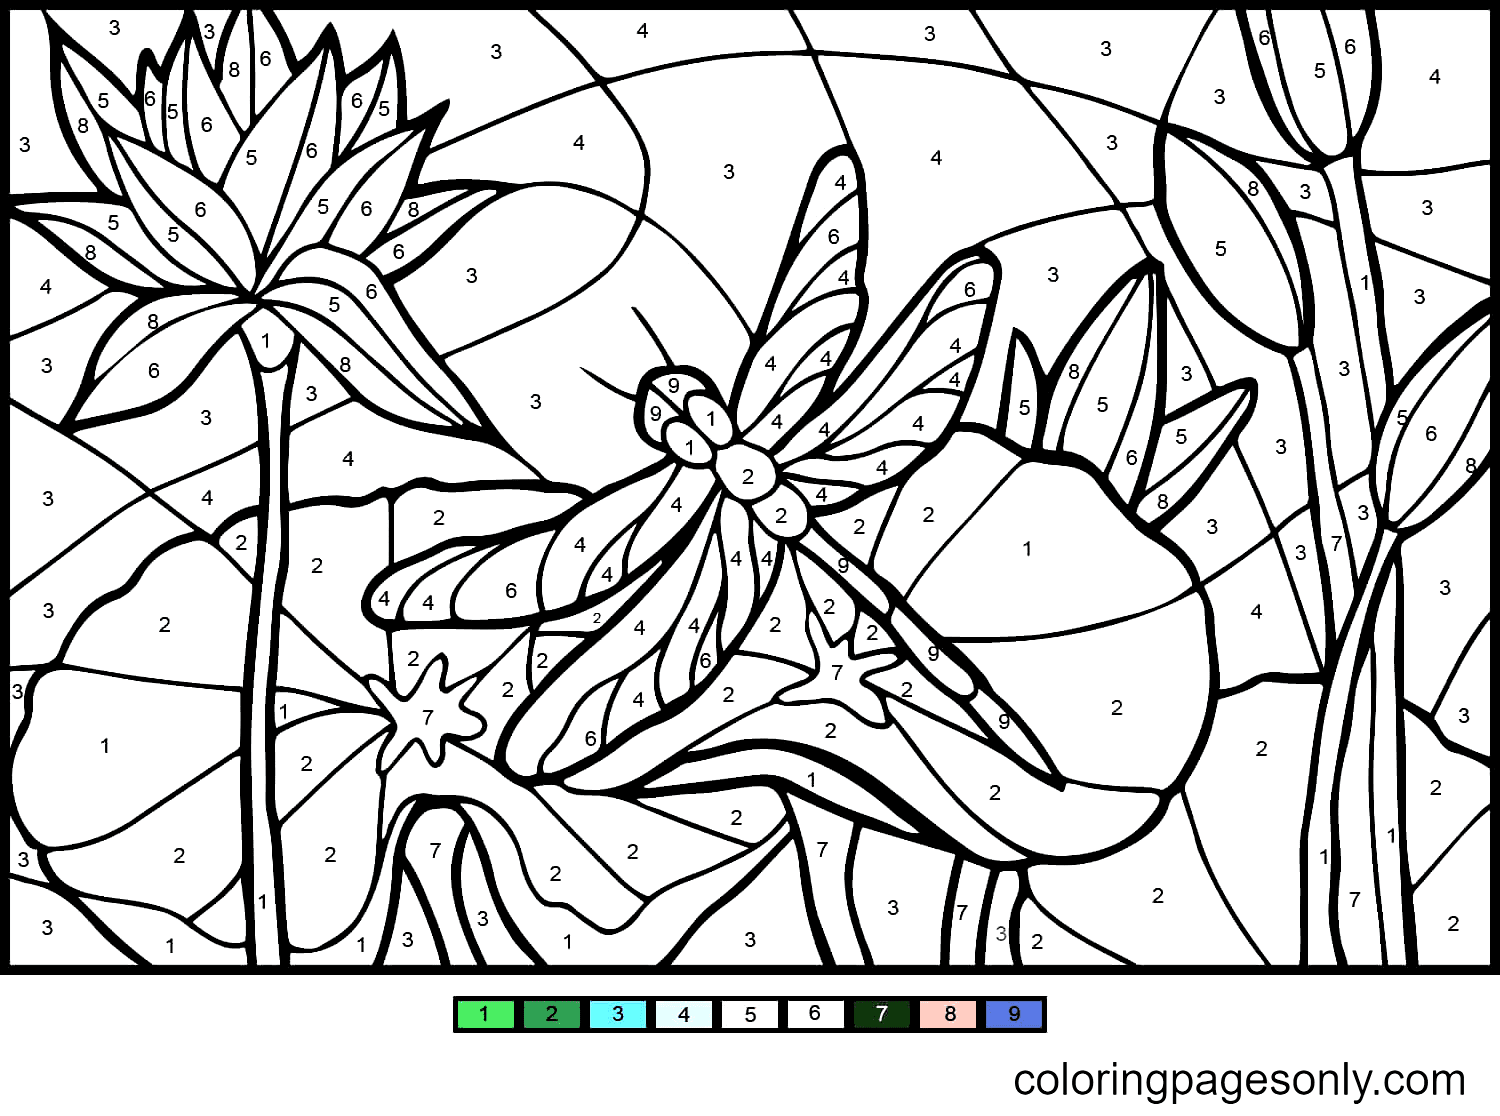 sunflower-color-by-number-coloring-pages-color-by-number-coloring